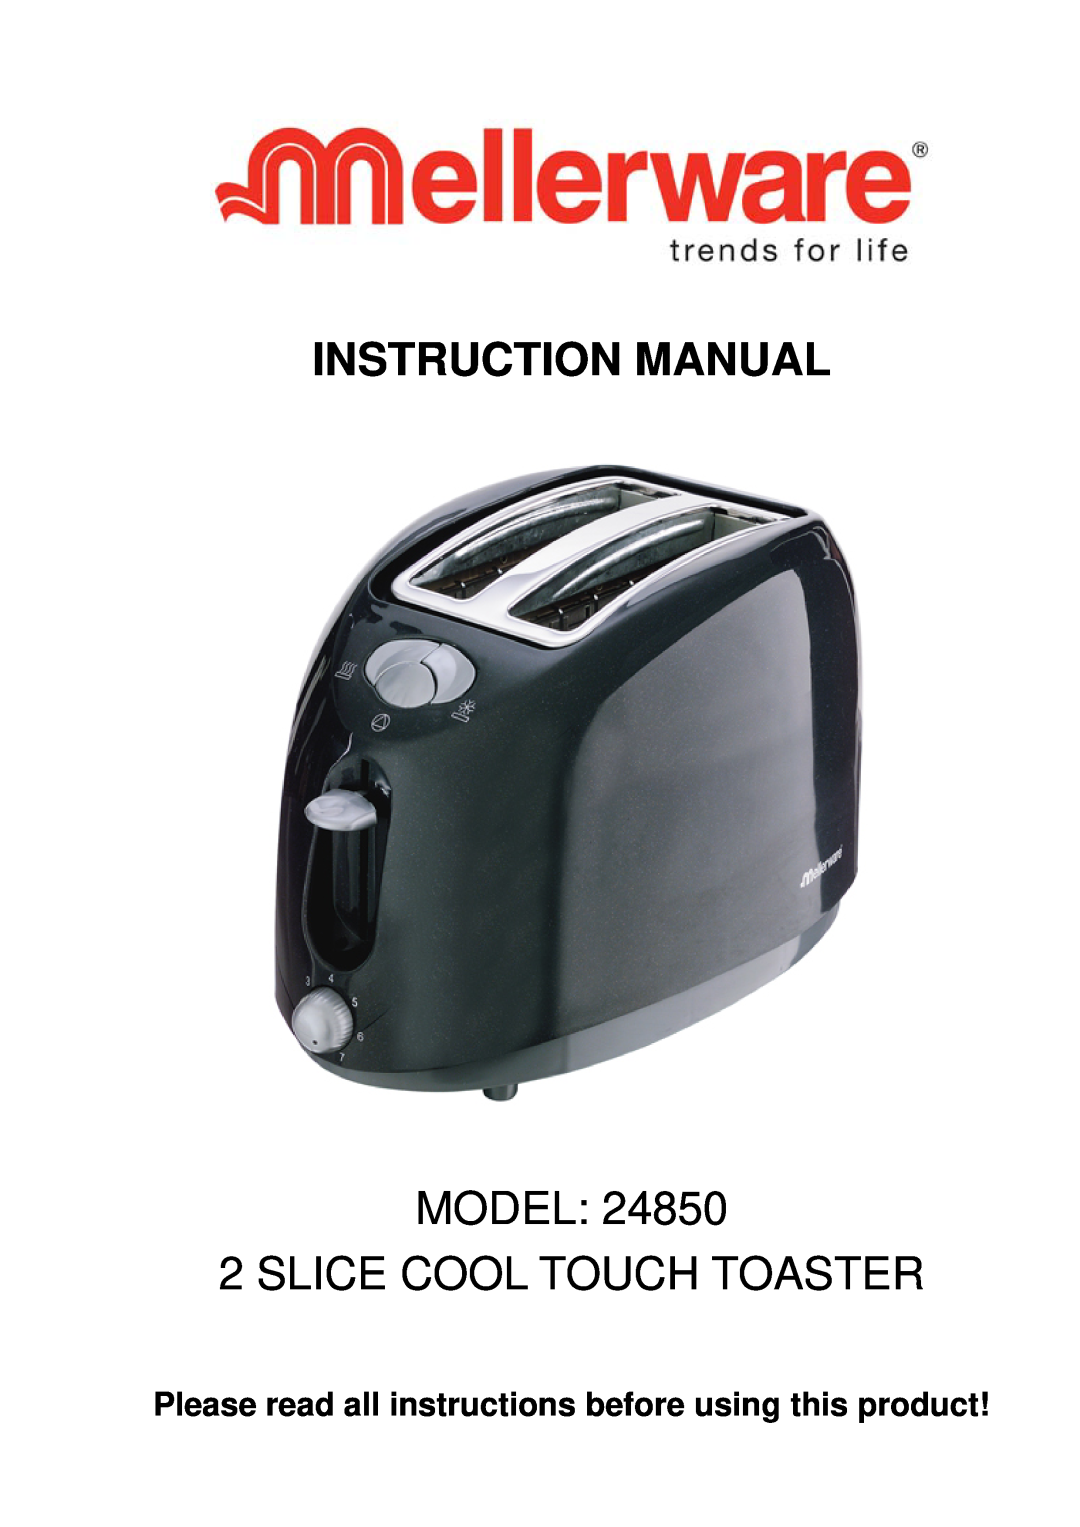 Mellerware 24850 instruction manual MODEL 2 SLICE COOL TOUCH TOASTER 